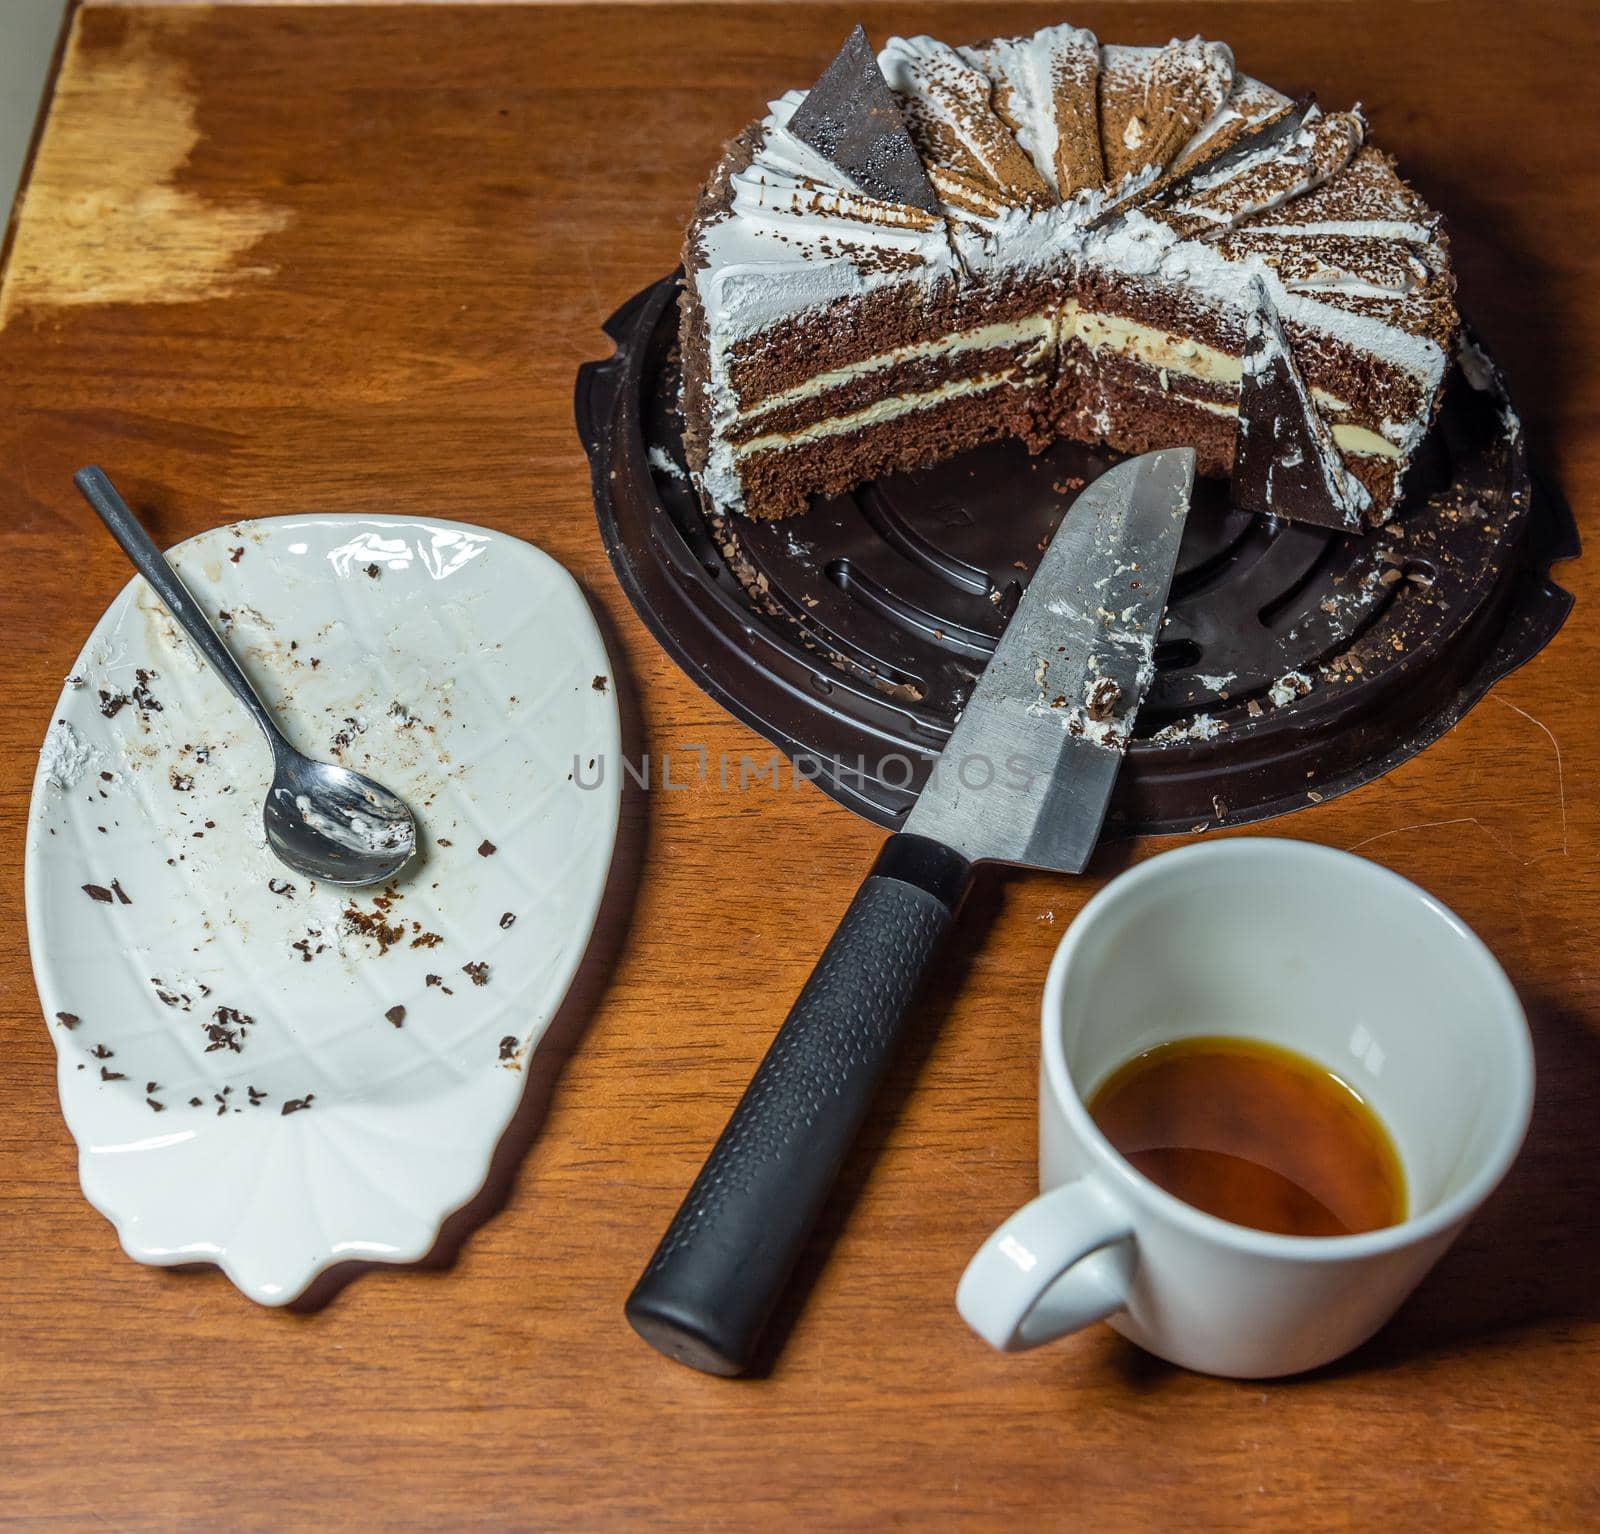 White plate with crumbs and a spoon after the cake, drinking a cup of coffee and a cut cake on a wooden table, top view by karpovkottt